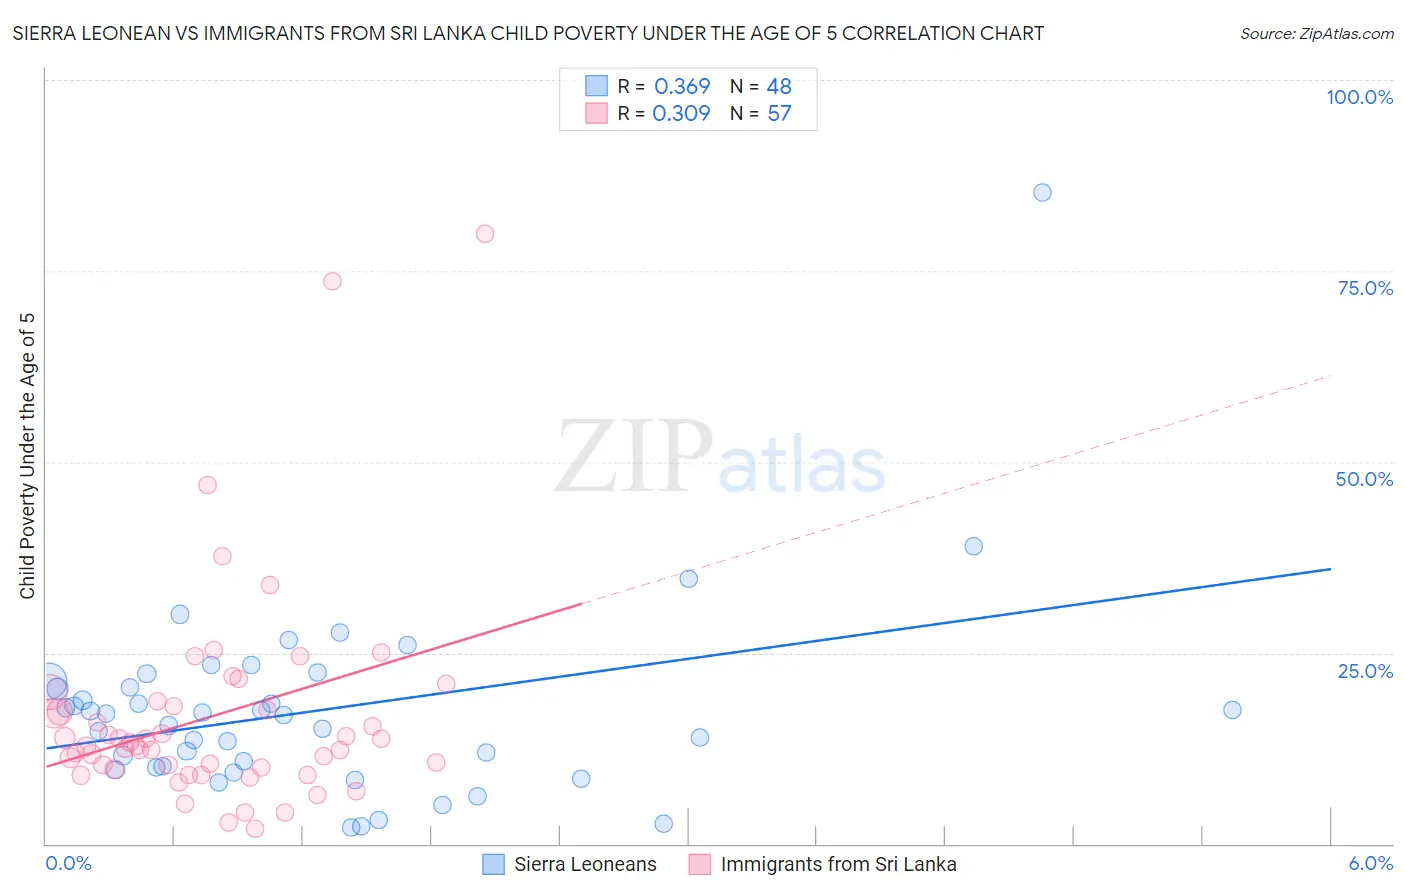 Sierra Leonean vs Immigrants from Sri Lanka Child Poverty Under the Age of 5